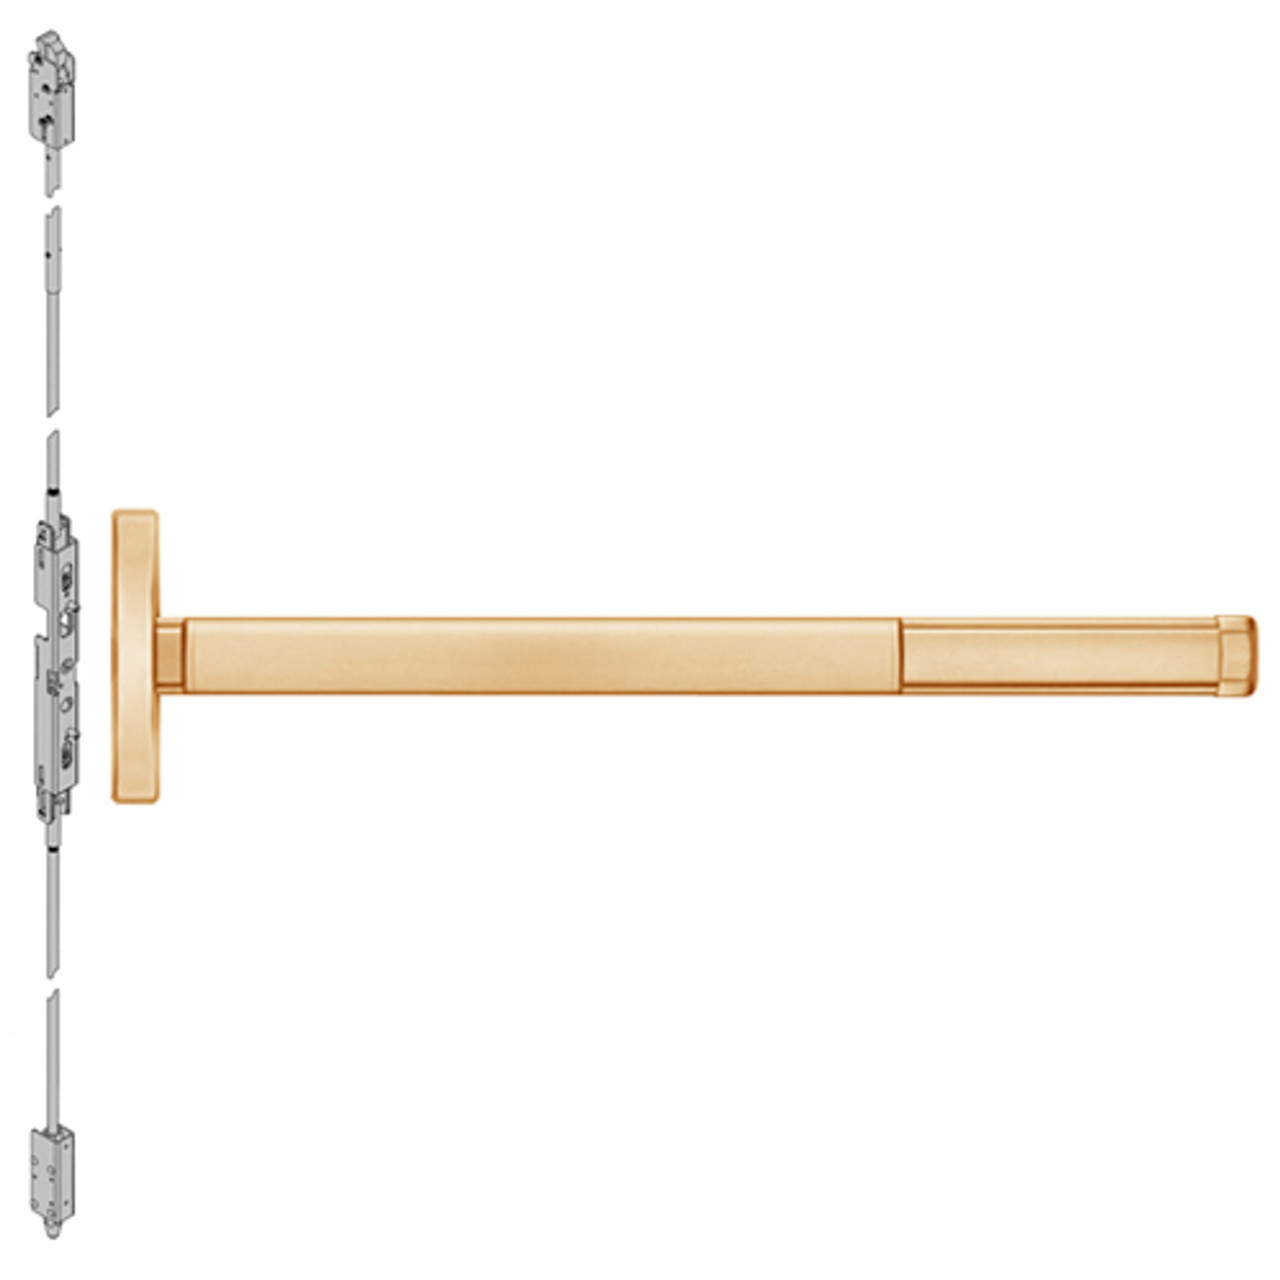 DE2603LBR-612-48 PHI 2600 Series Concealed Vertical Rod Exit Device with Delayed Egress Prepped for Key Retracts Latchbolt in Satin Bronze Finish